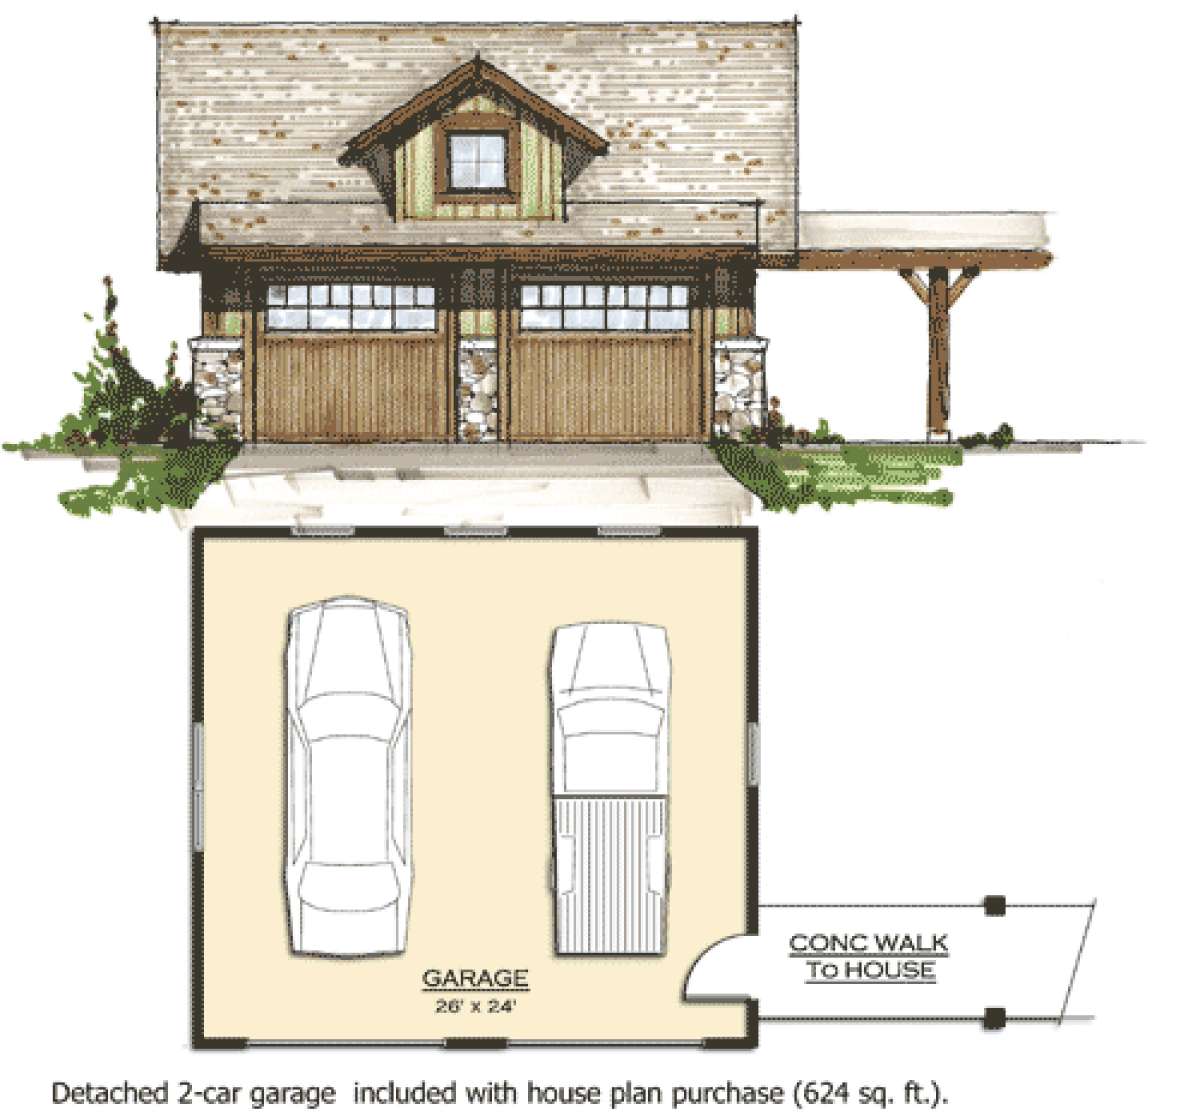 Garage for House Plan #8504-00089